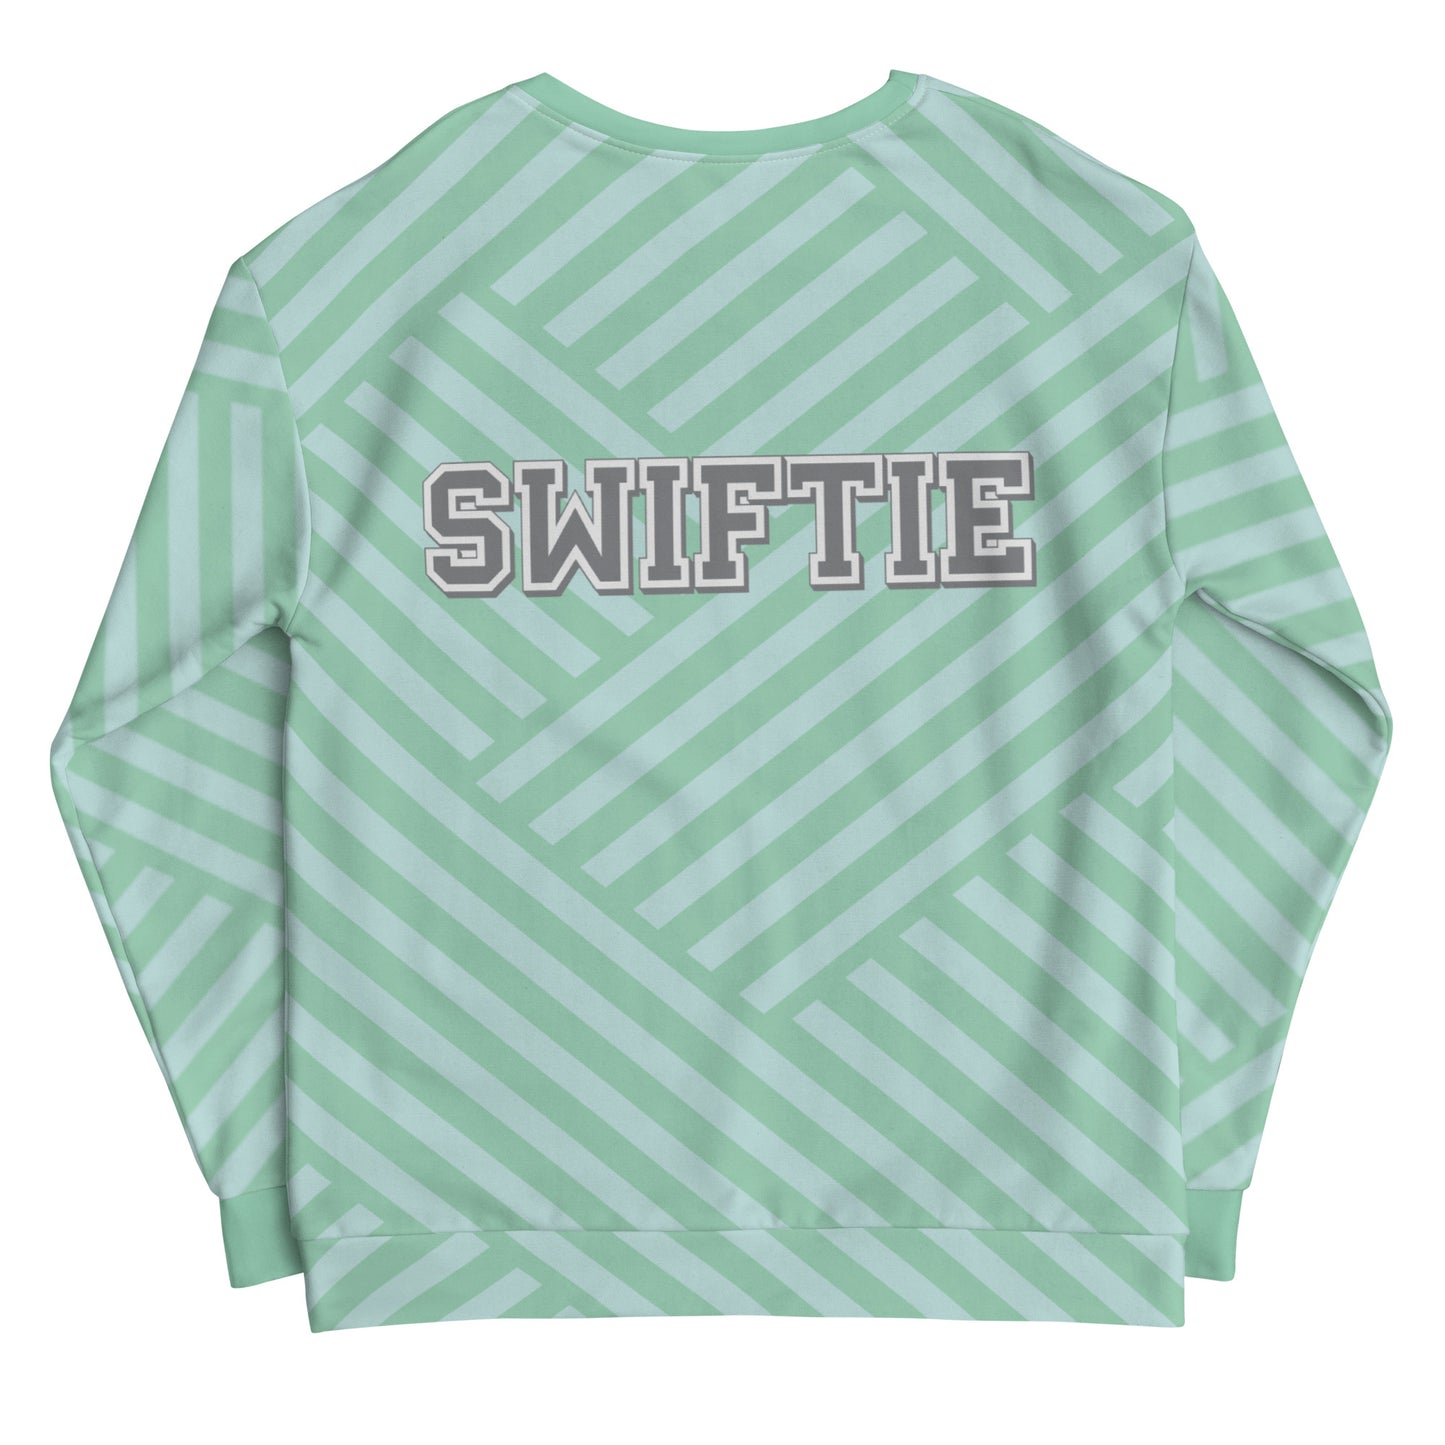 Me! Swiftie - Inspired By Taylor Swift - Sustainably Made Sweatshirt